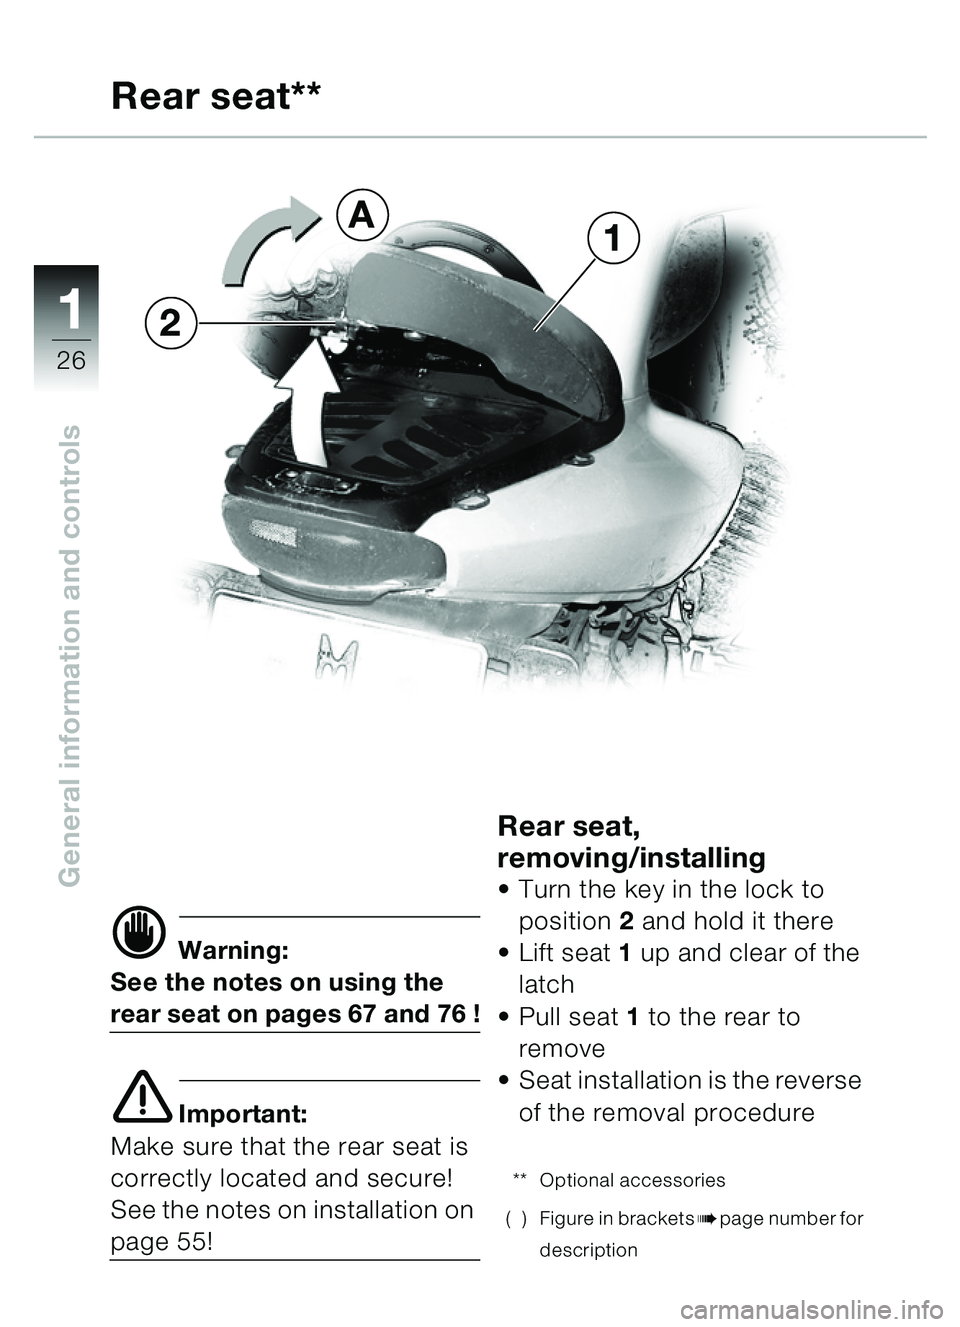 BMW MOTORRAD C1 2000  Riders Manual (in English) 11
26
General information and controls
d Warning:
See the notes on using the 
rear seat on pages 67 and 76 !
e Important:
Make sure that the rear seat is 
correctly located and secure!
See the notes o